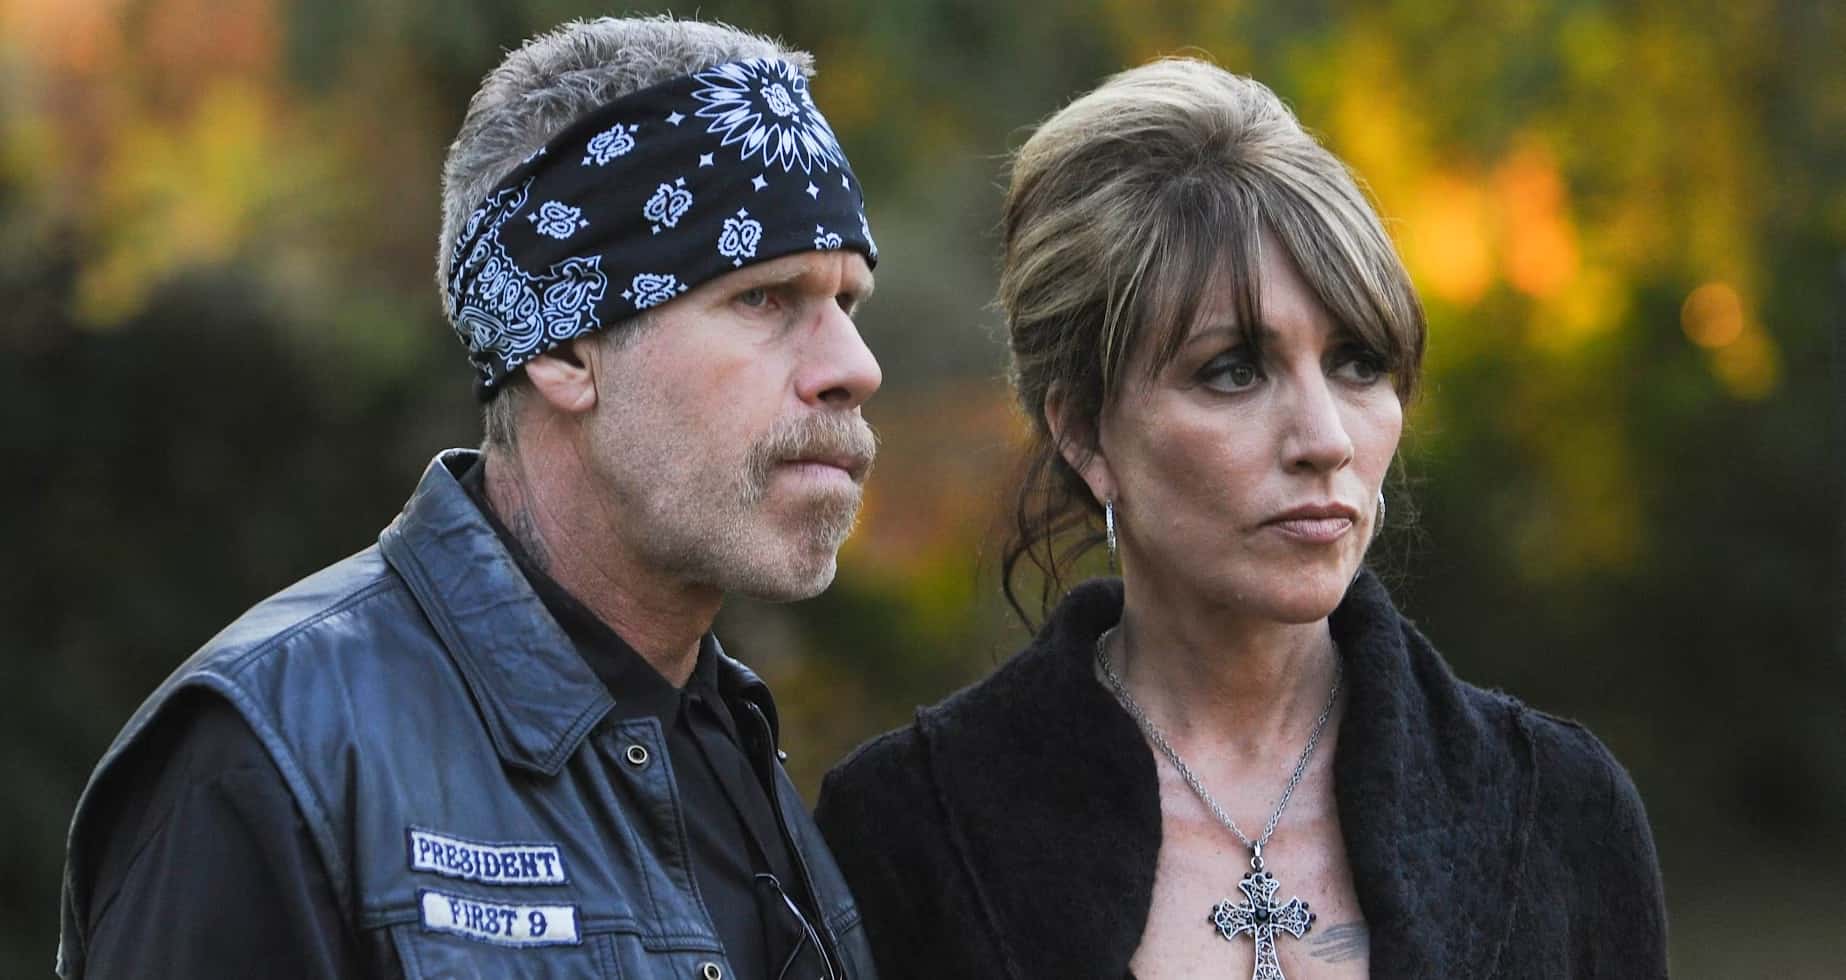 Katey Sagal as Gemma Morrow in the show, Sons of Anarchy (Credits: FX)